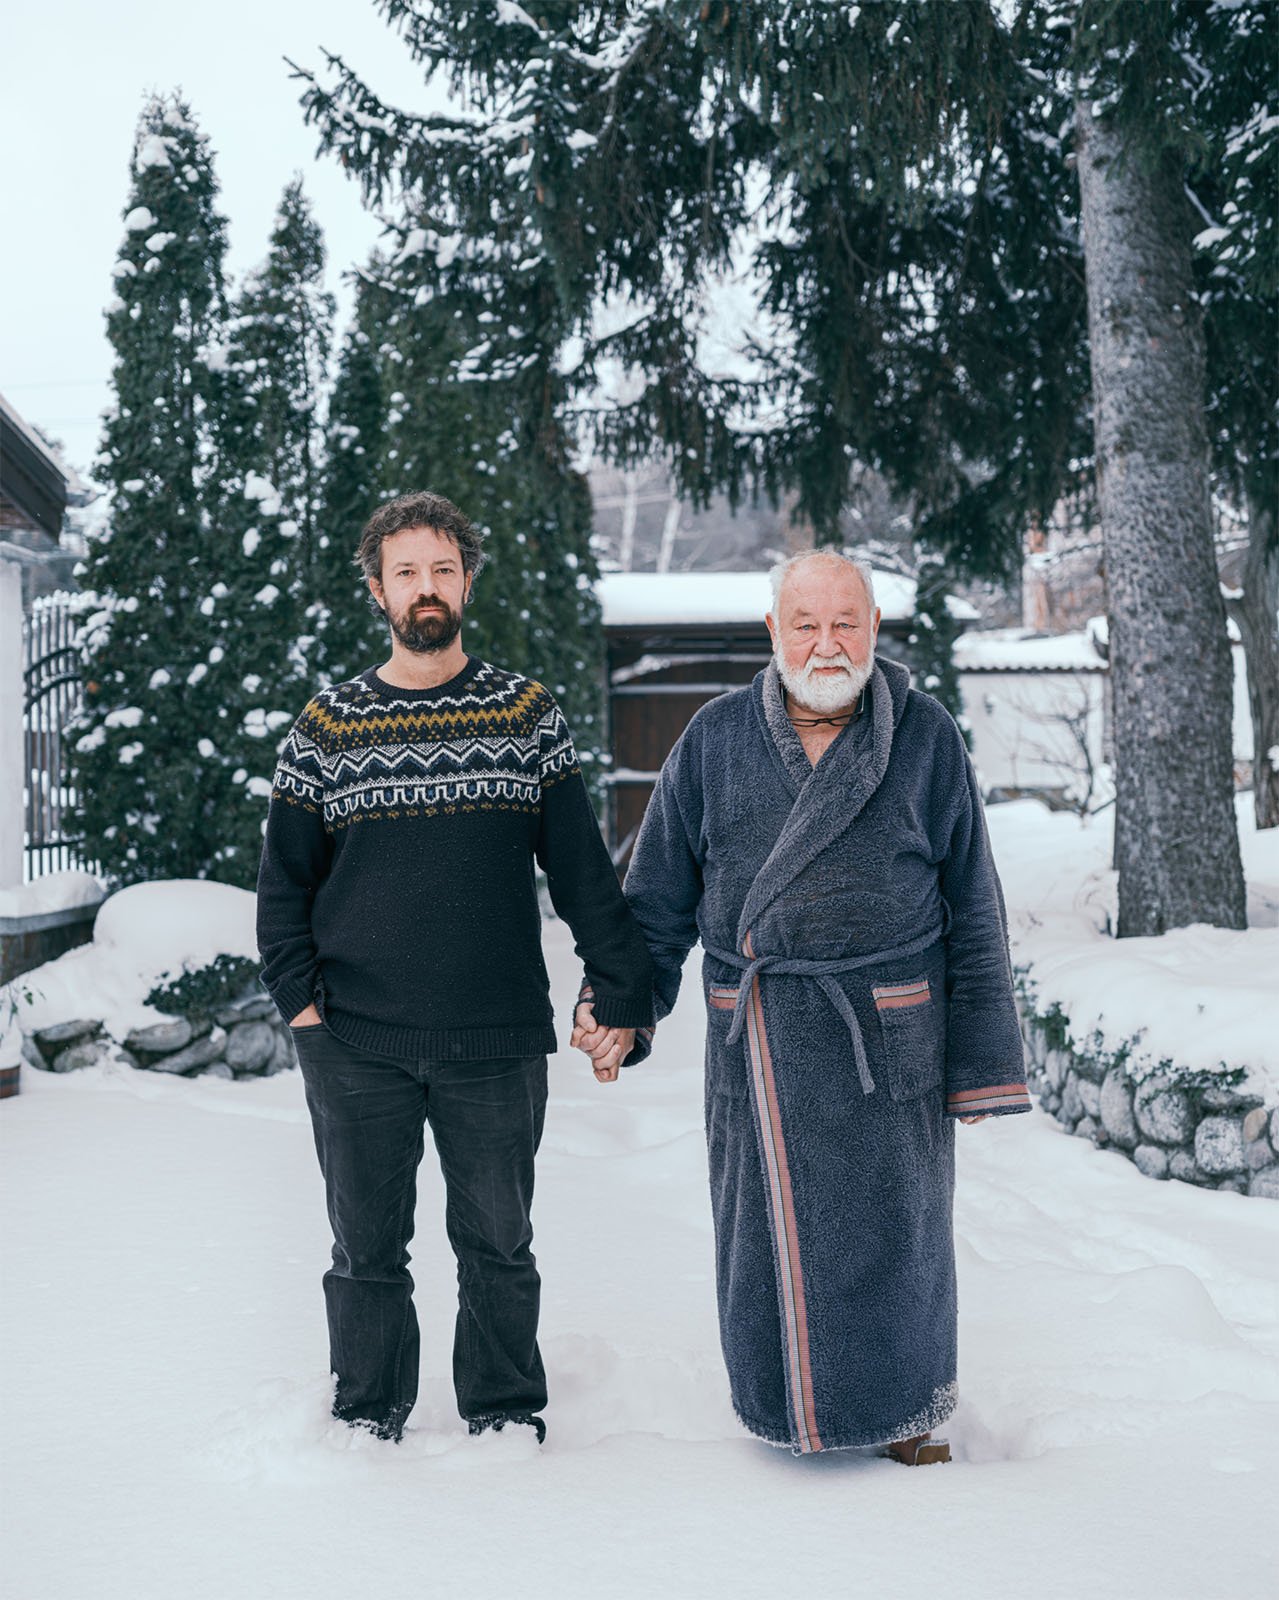 A young man in a sweater and an older man in a bathrobe standing hand in hand on a snowy path, with tall pine trees and a light snowfall around them.